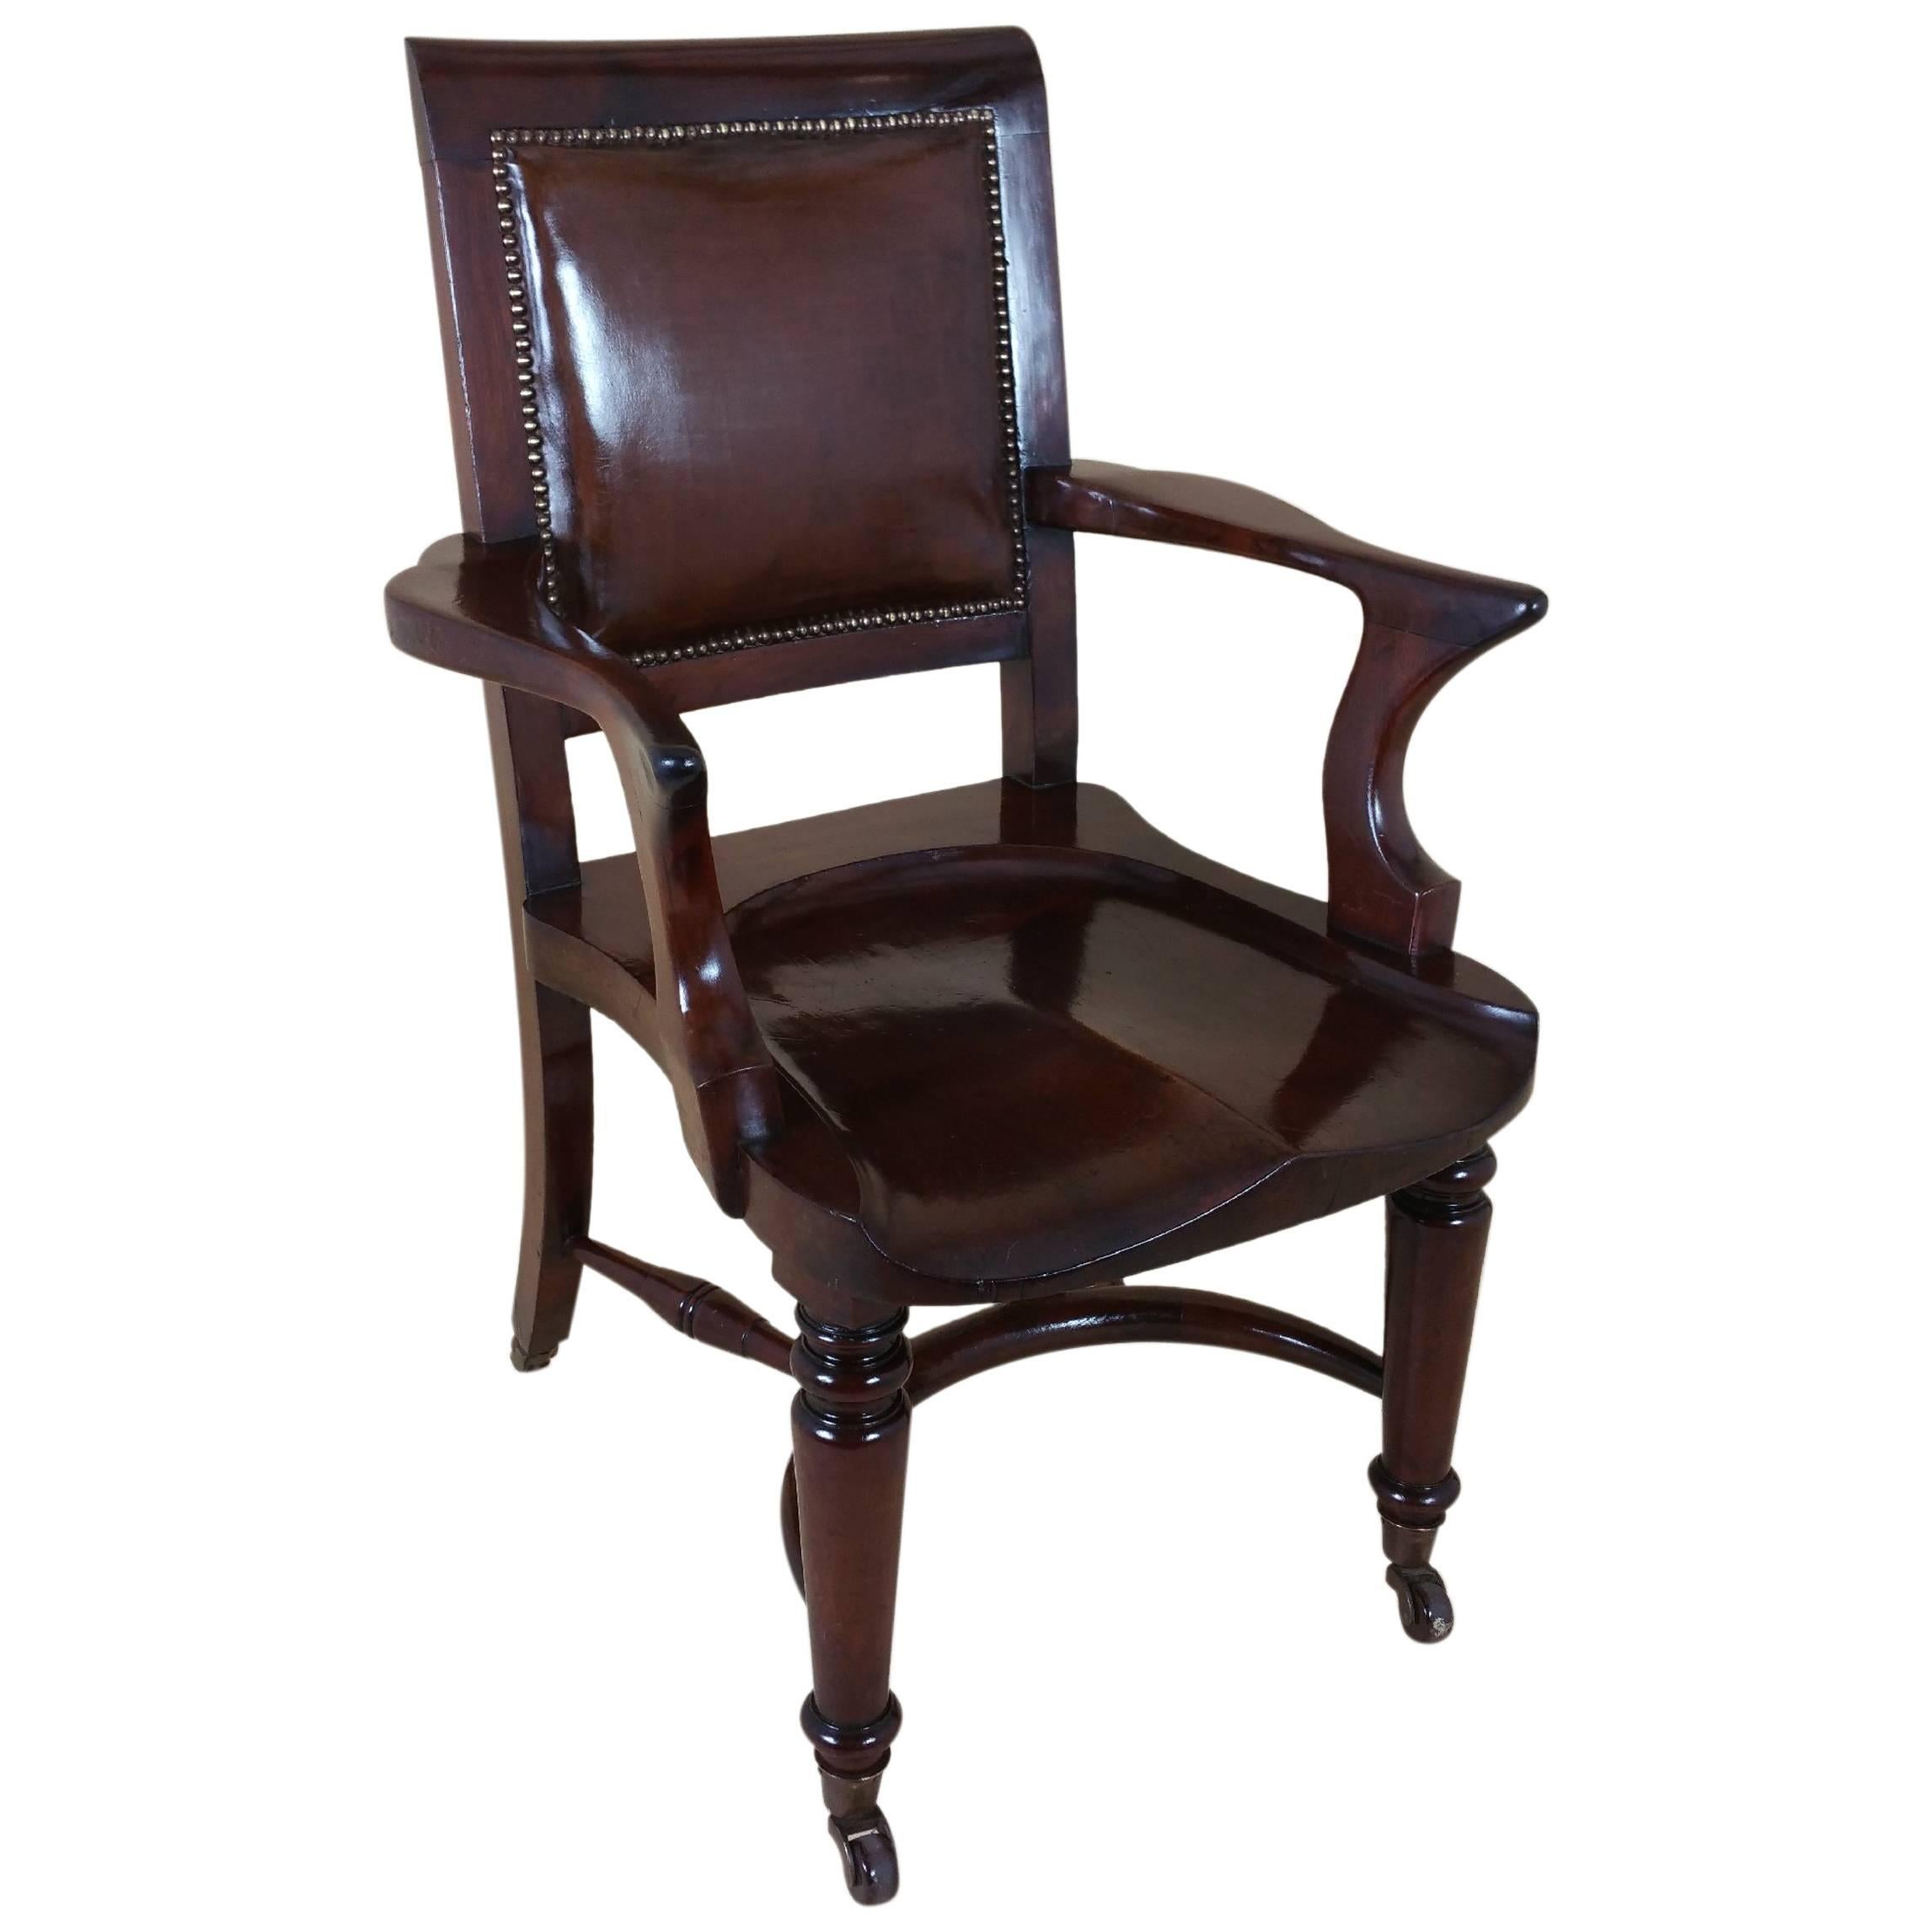 Victorian Mahogany Solid Seat Desk Chair with Leather Back